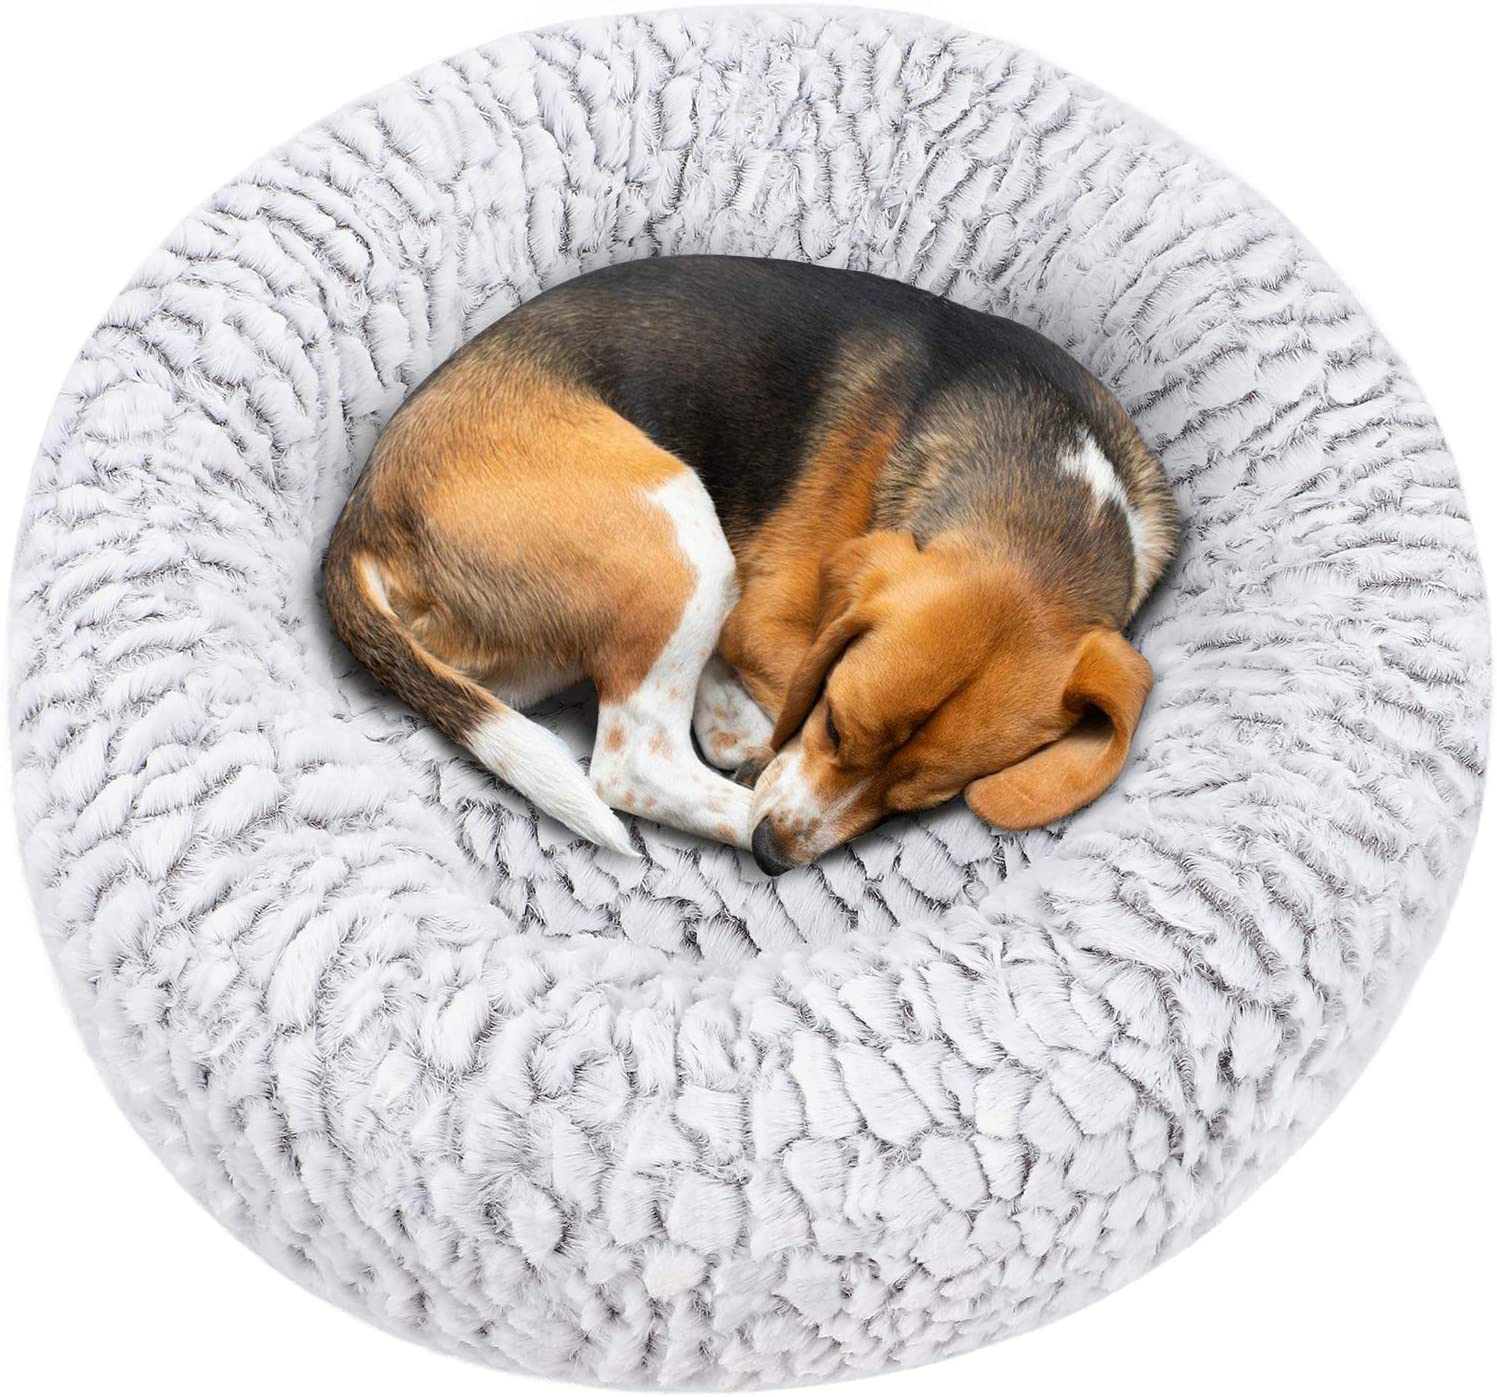 Lorfancy Calming Donut Dog Bed round Fluffy Plush Durable Washable Cuddler Anxiety Warm Dog Beds Mats for Large Medium Small Pet Dogs Cats